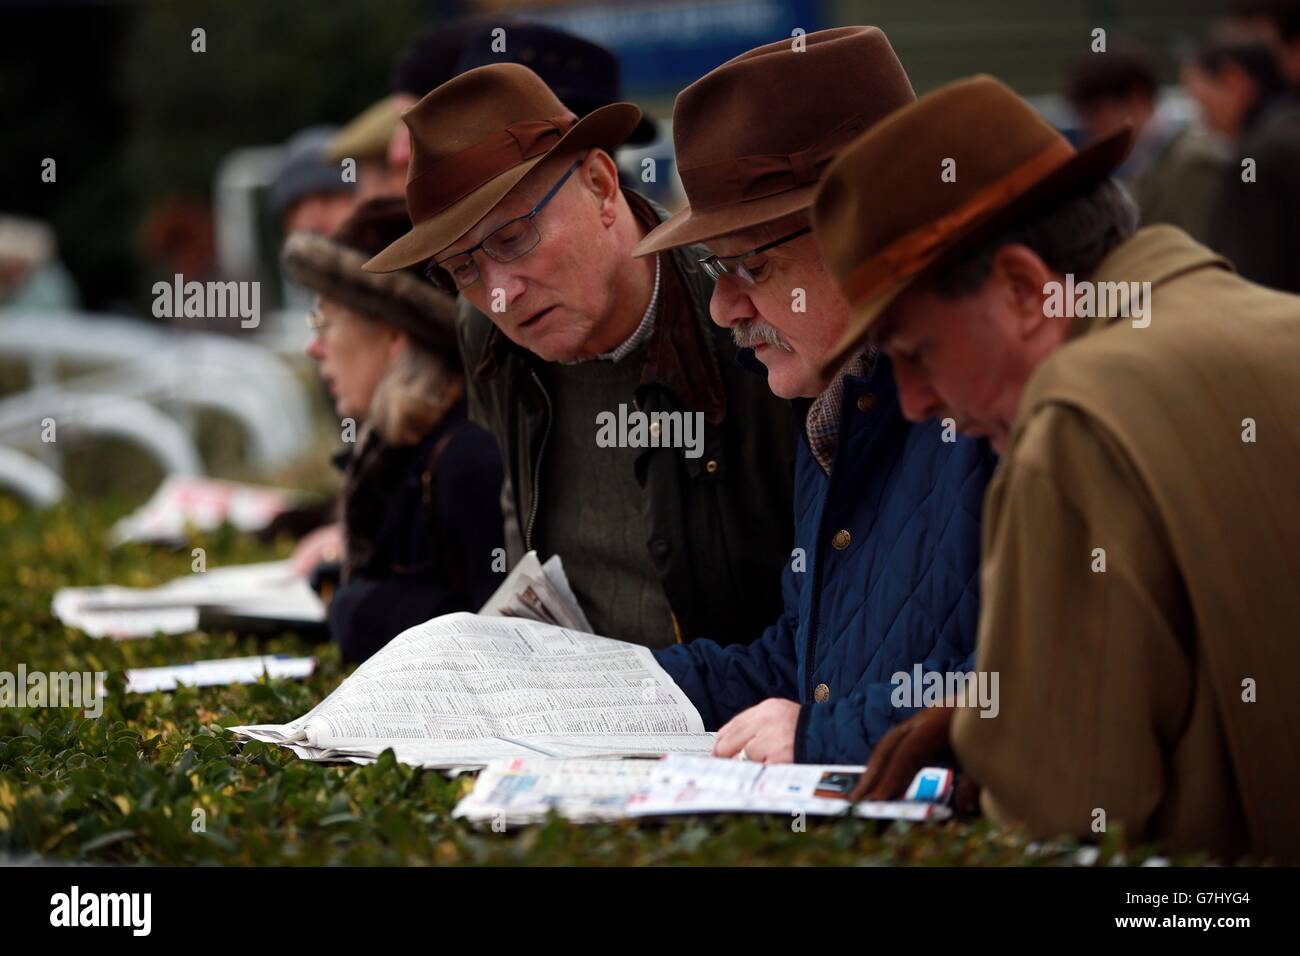 Horse Racing - 2014 William Hill Winter Festival - Day One - Kempton Park. Race goers check the form on day one of the William Hill Winter Festival at Kempton Park Racecourse, Sunbury on Thames. Stock Photo